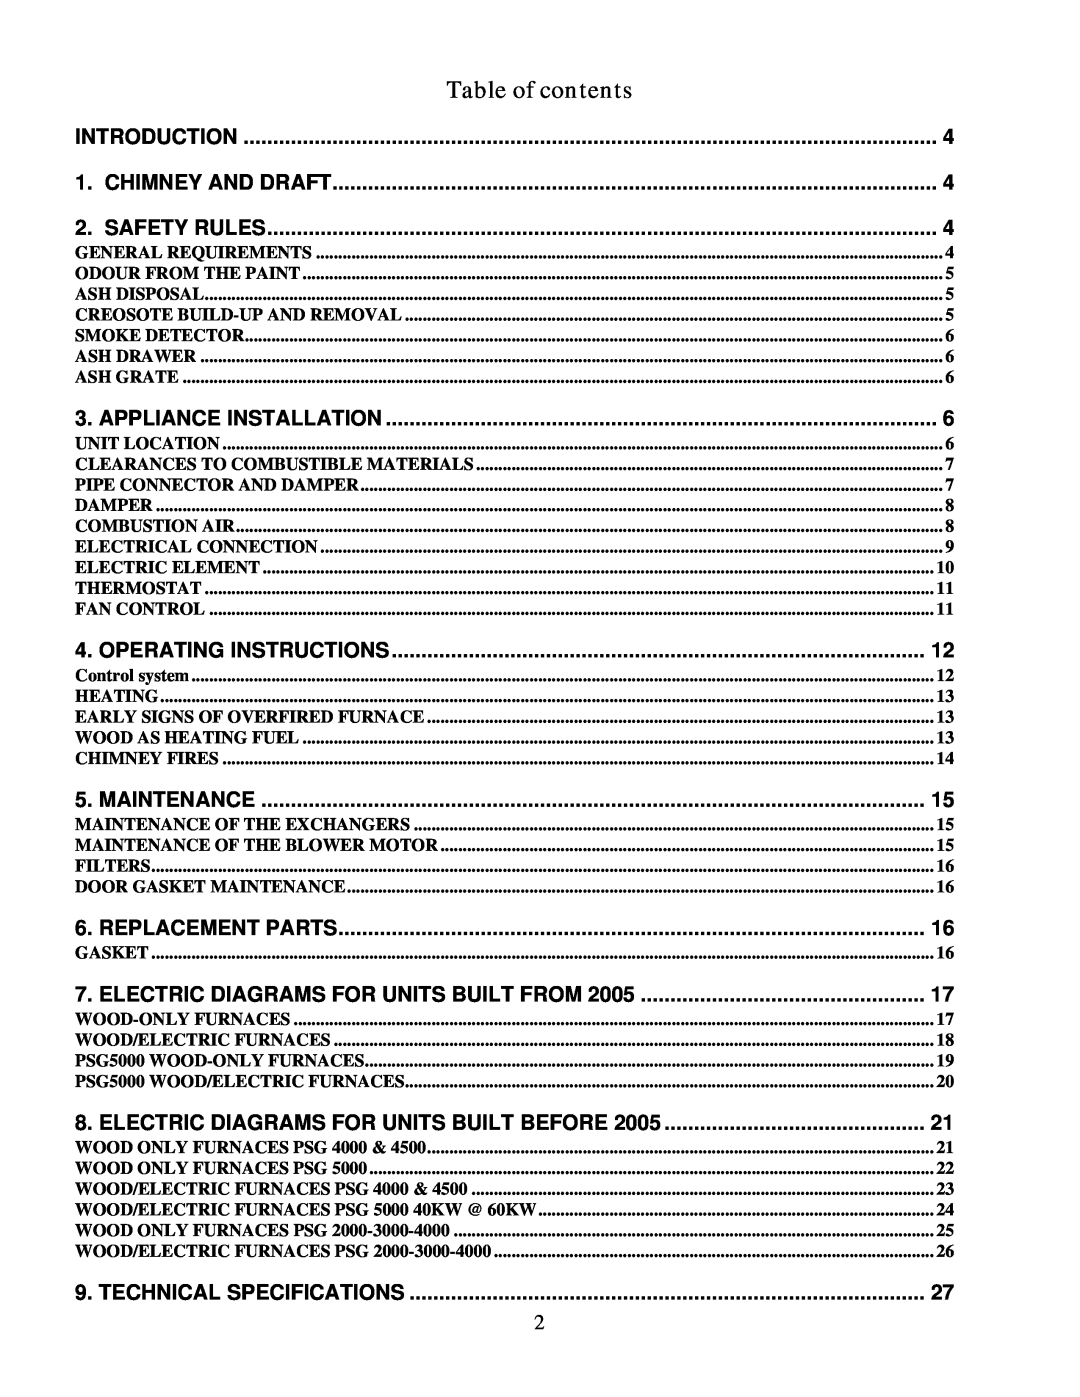 White Rodgers G1N 4R9 manual Table of contents 